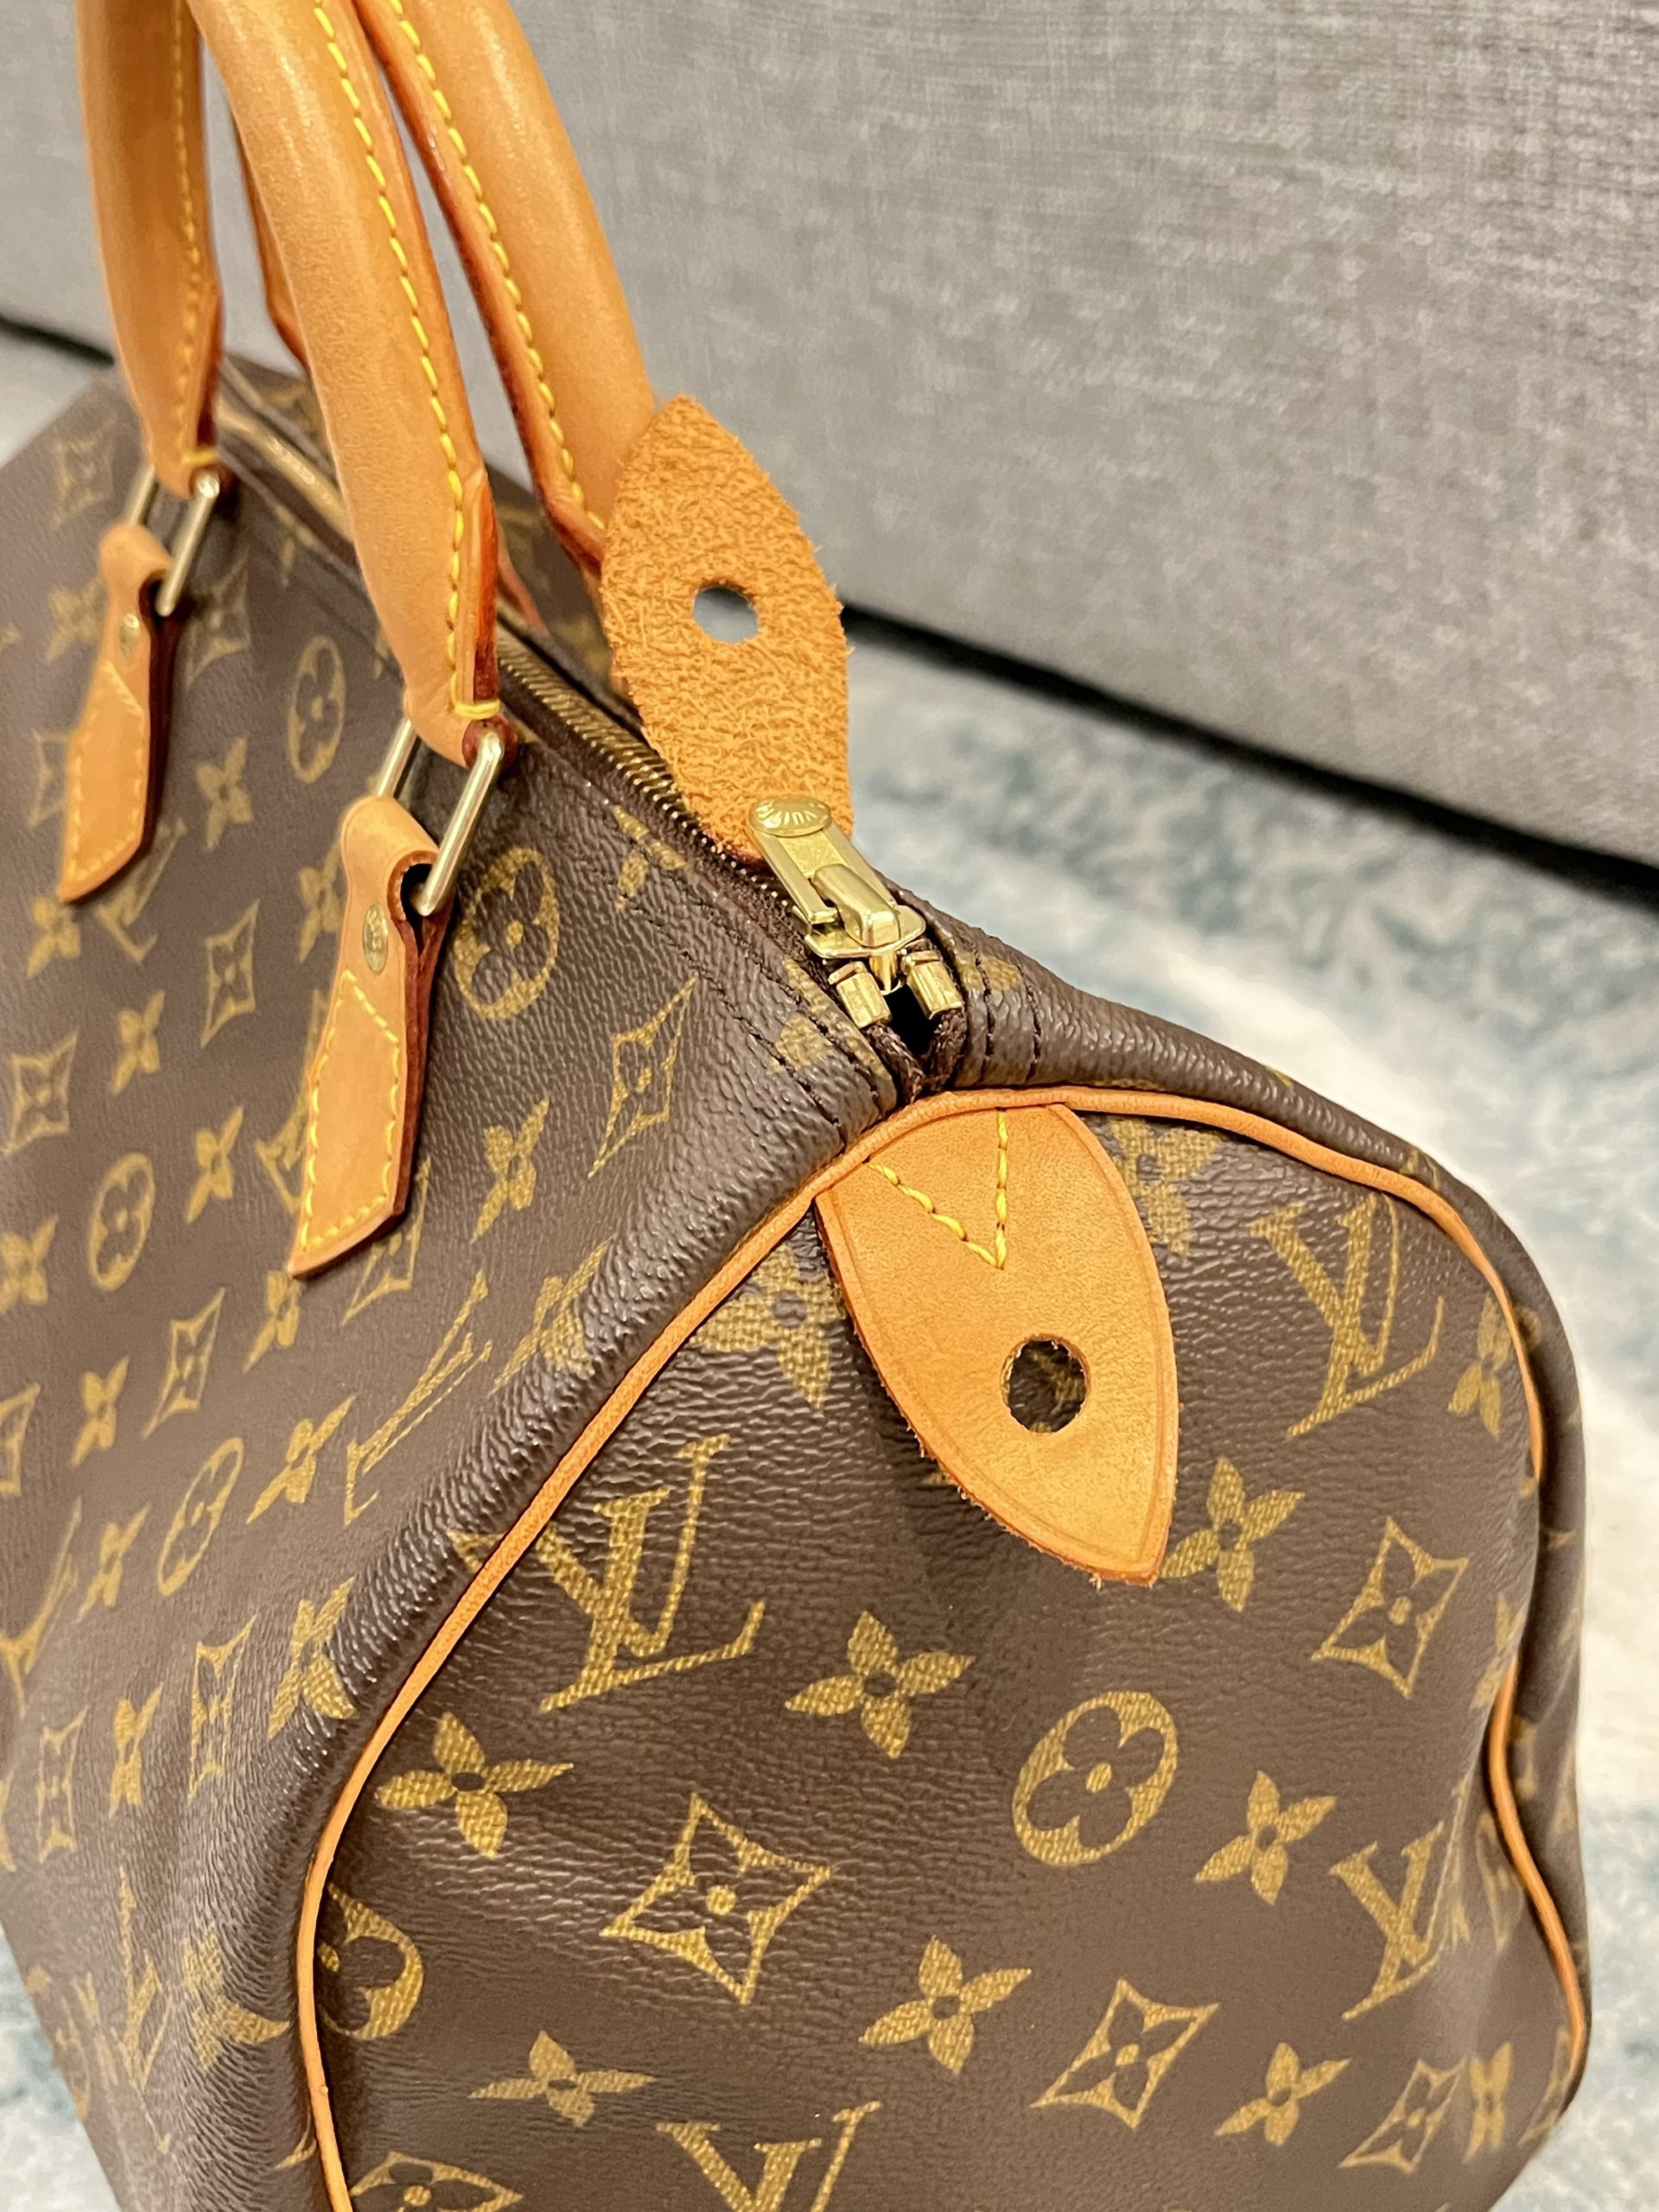 Vintage Louis Vuitton mono speedy 25 - Review and contents 